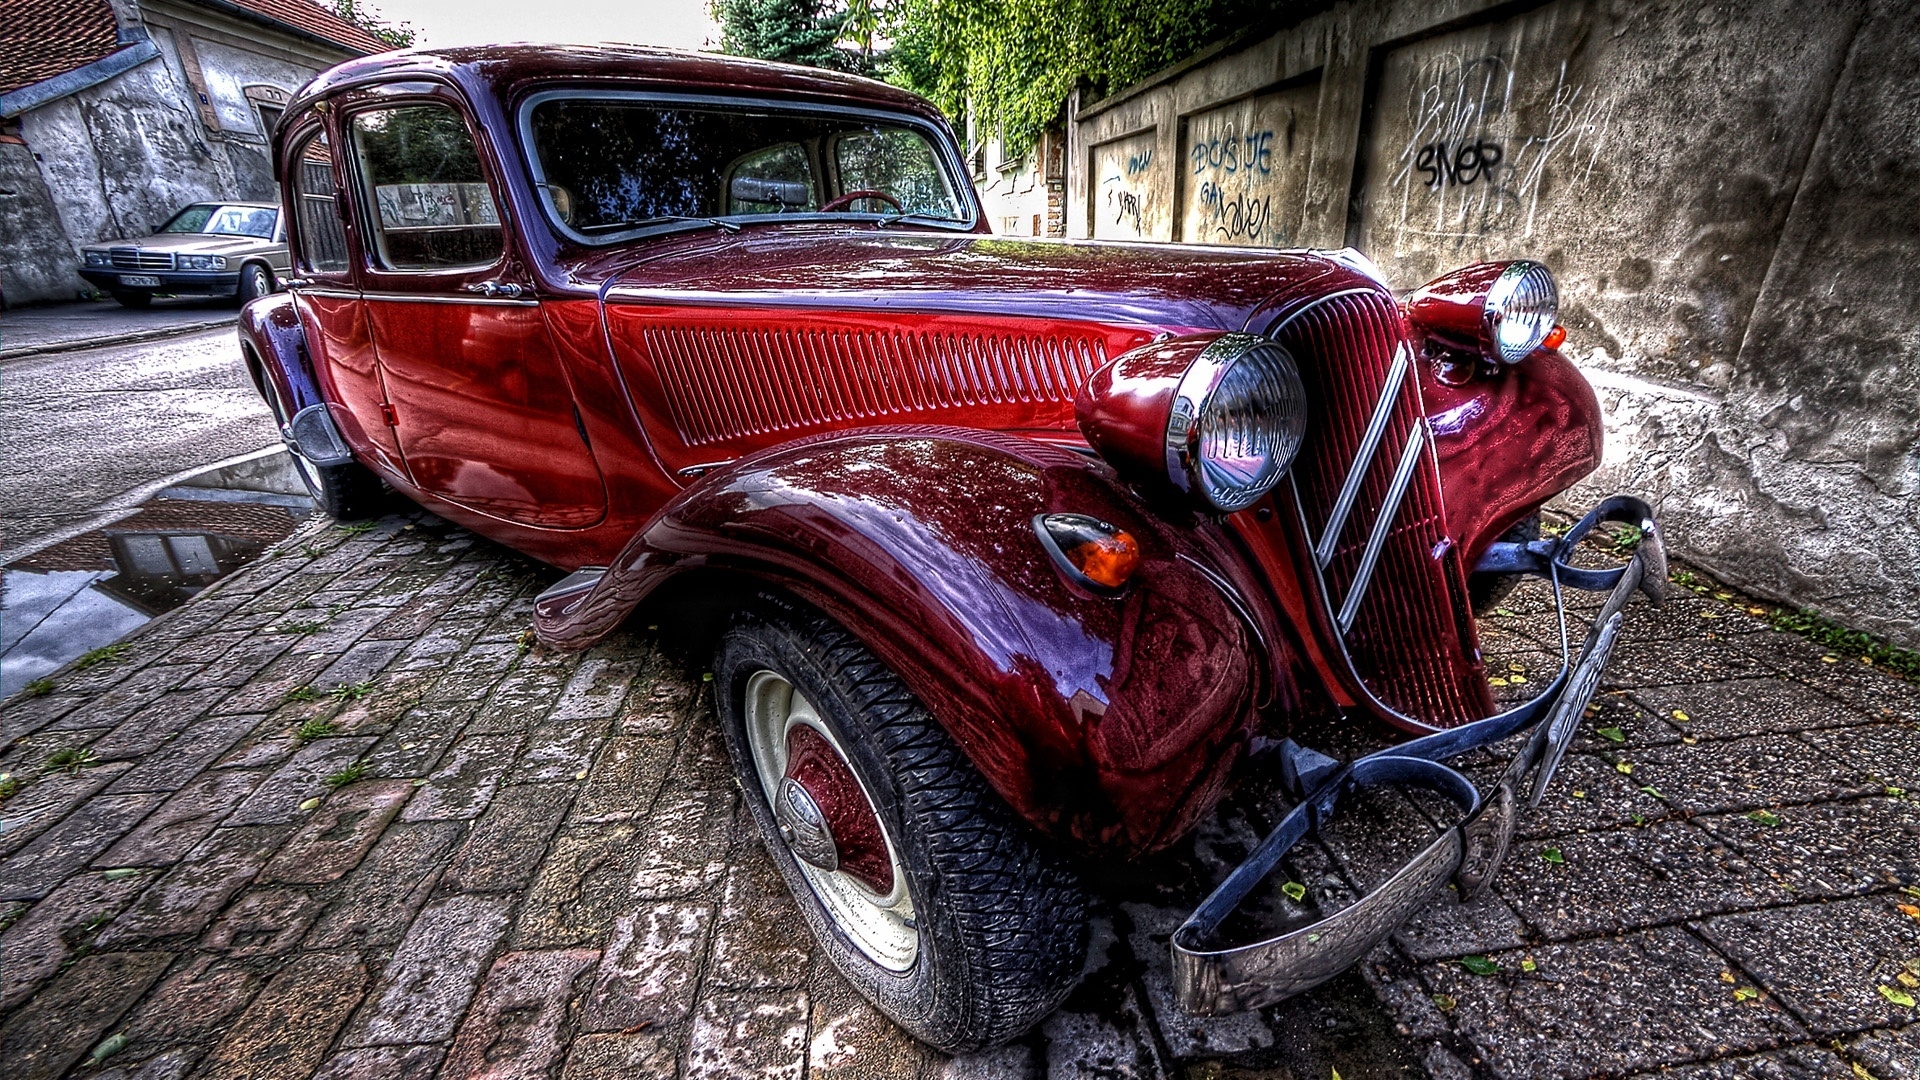 Amazing Old Car HDR for 1920 x 1080 HDTV 1080p resolution